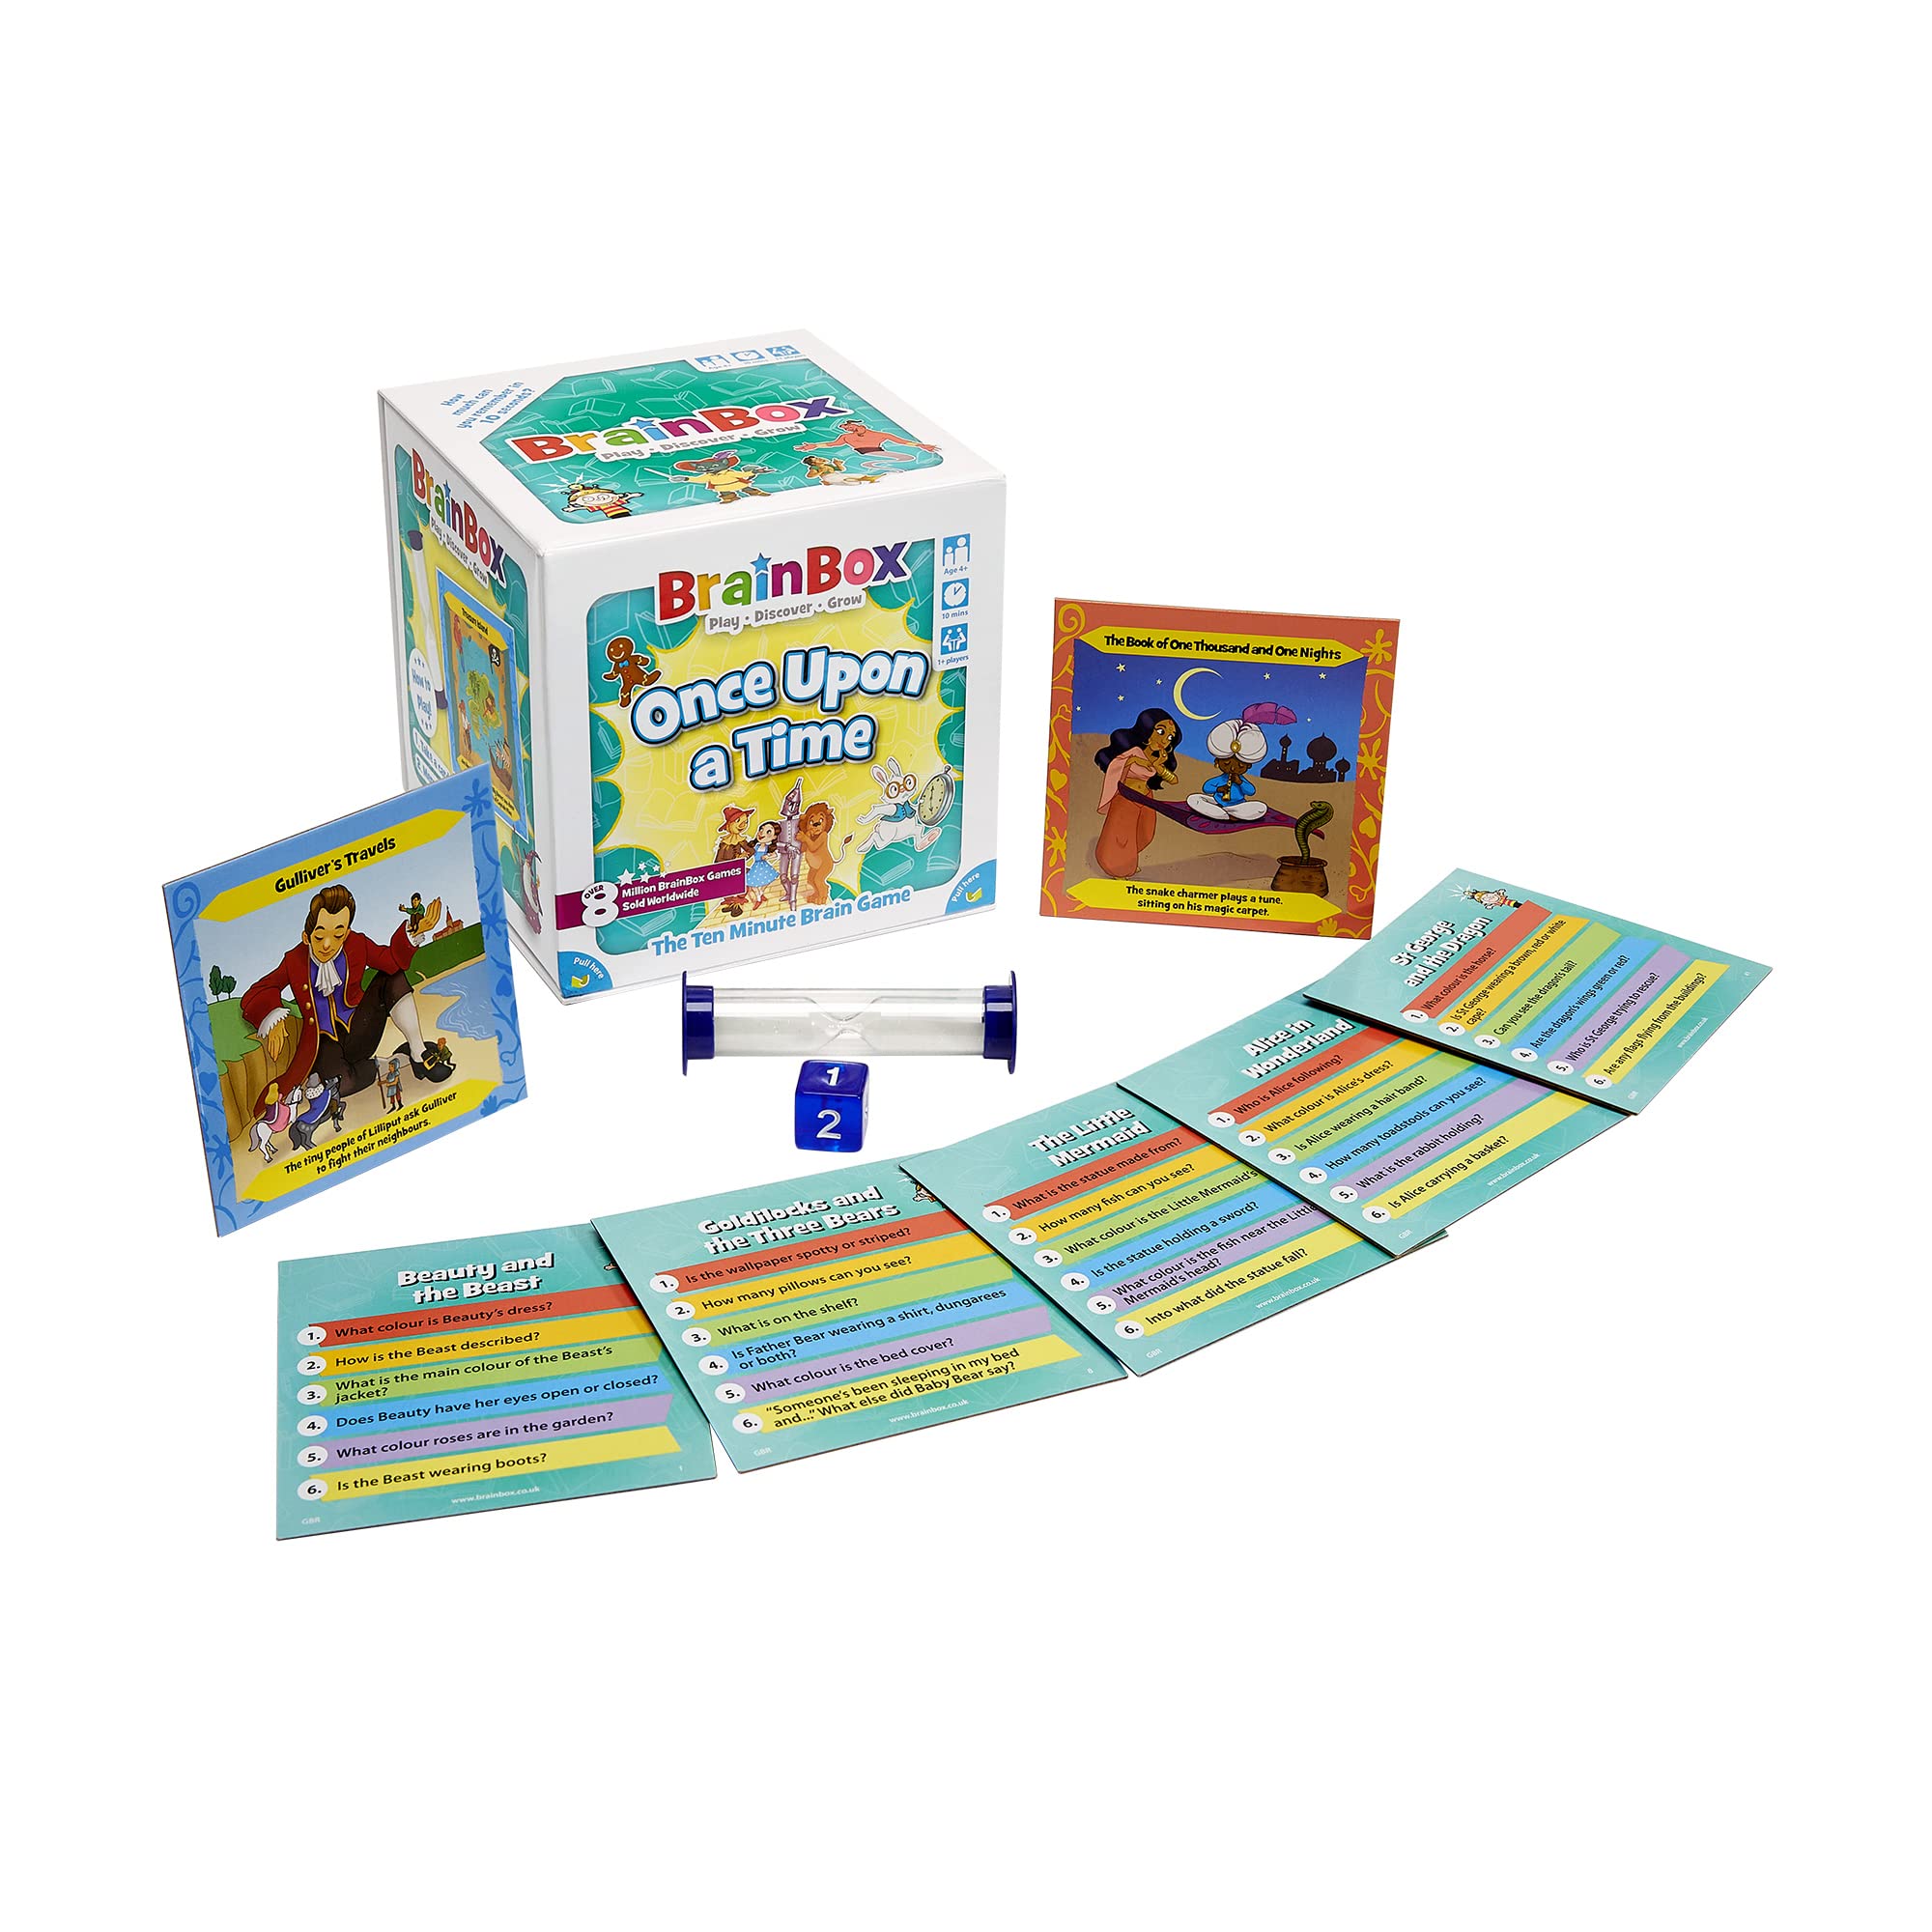 BrainBox Once Upon a Time Card Game | Trivia Game | Fun Game for Family Game Night | Memory Game for Kids and Adults | Ages 8+ | 1+ Players | Average Playtime 10 Minutes | Made by Green Board Games